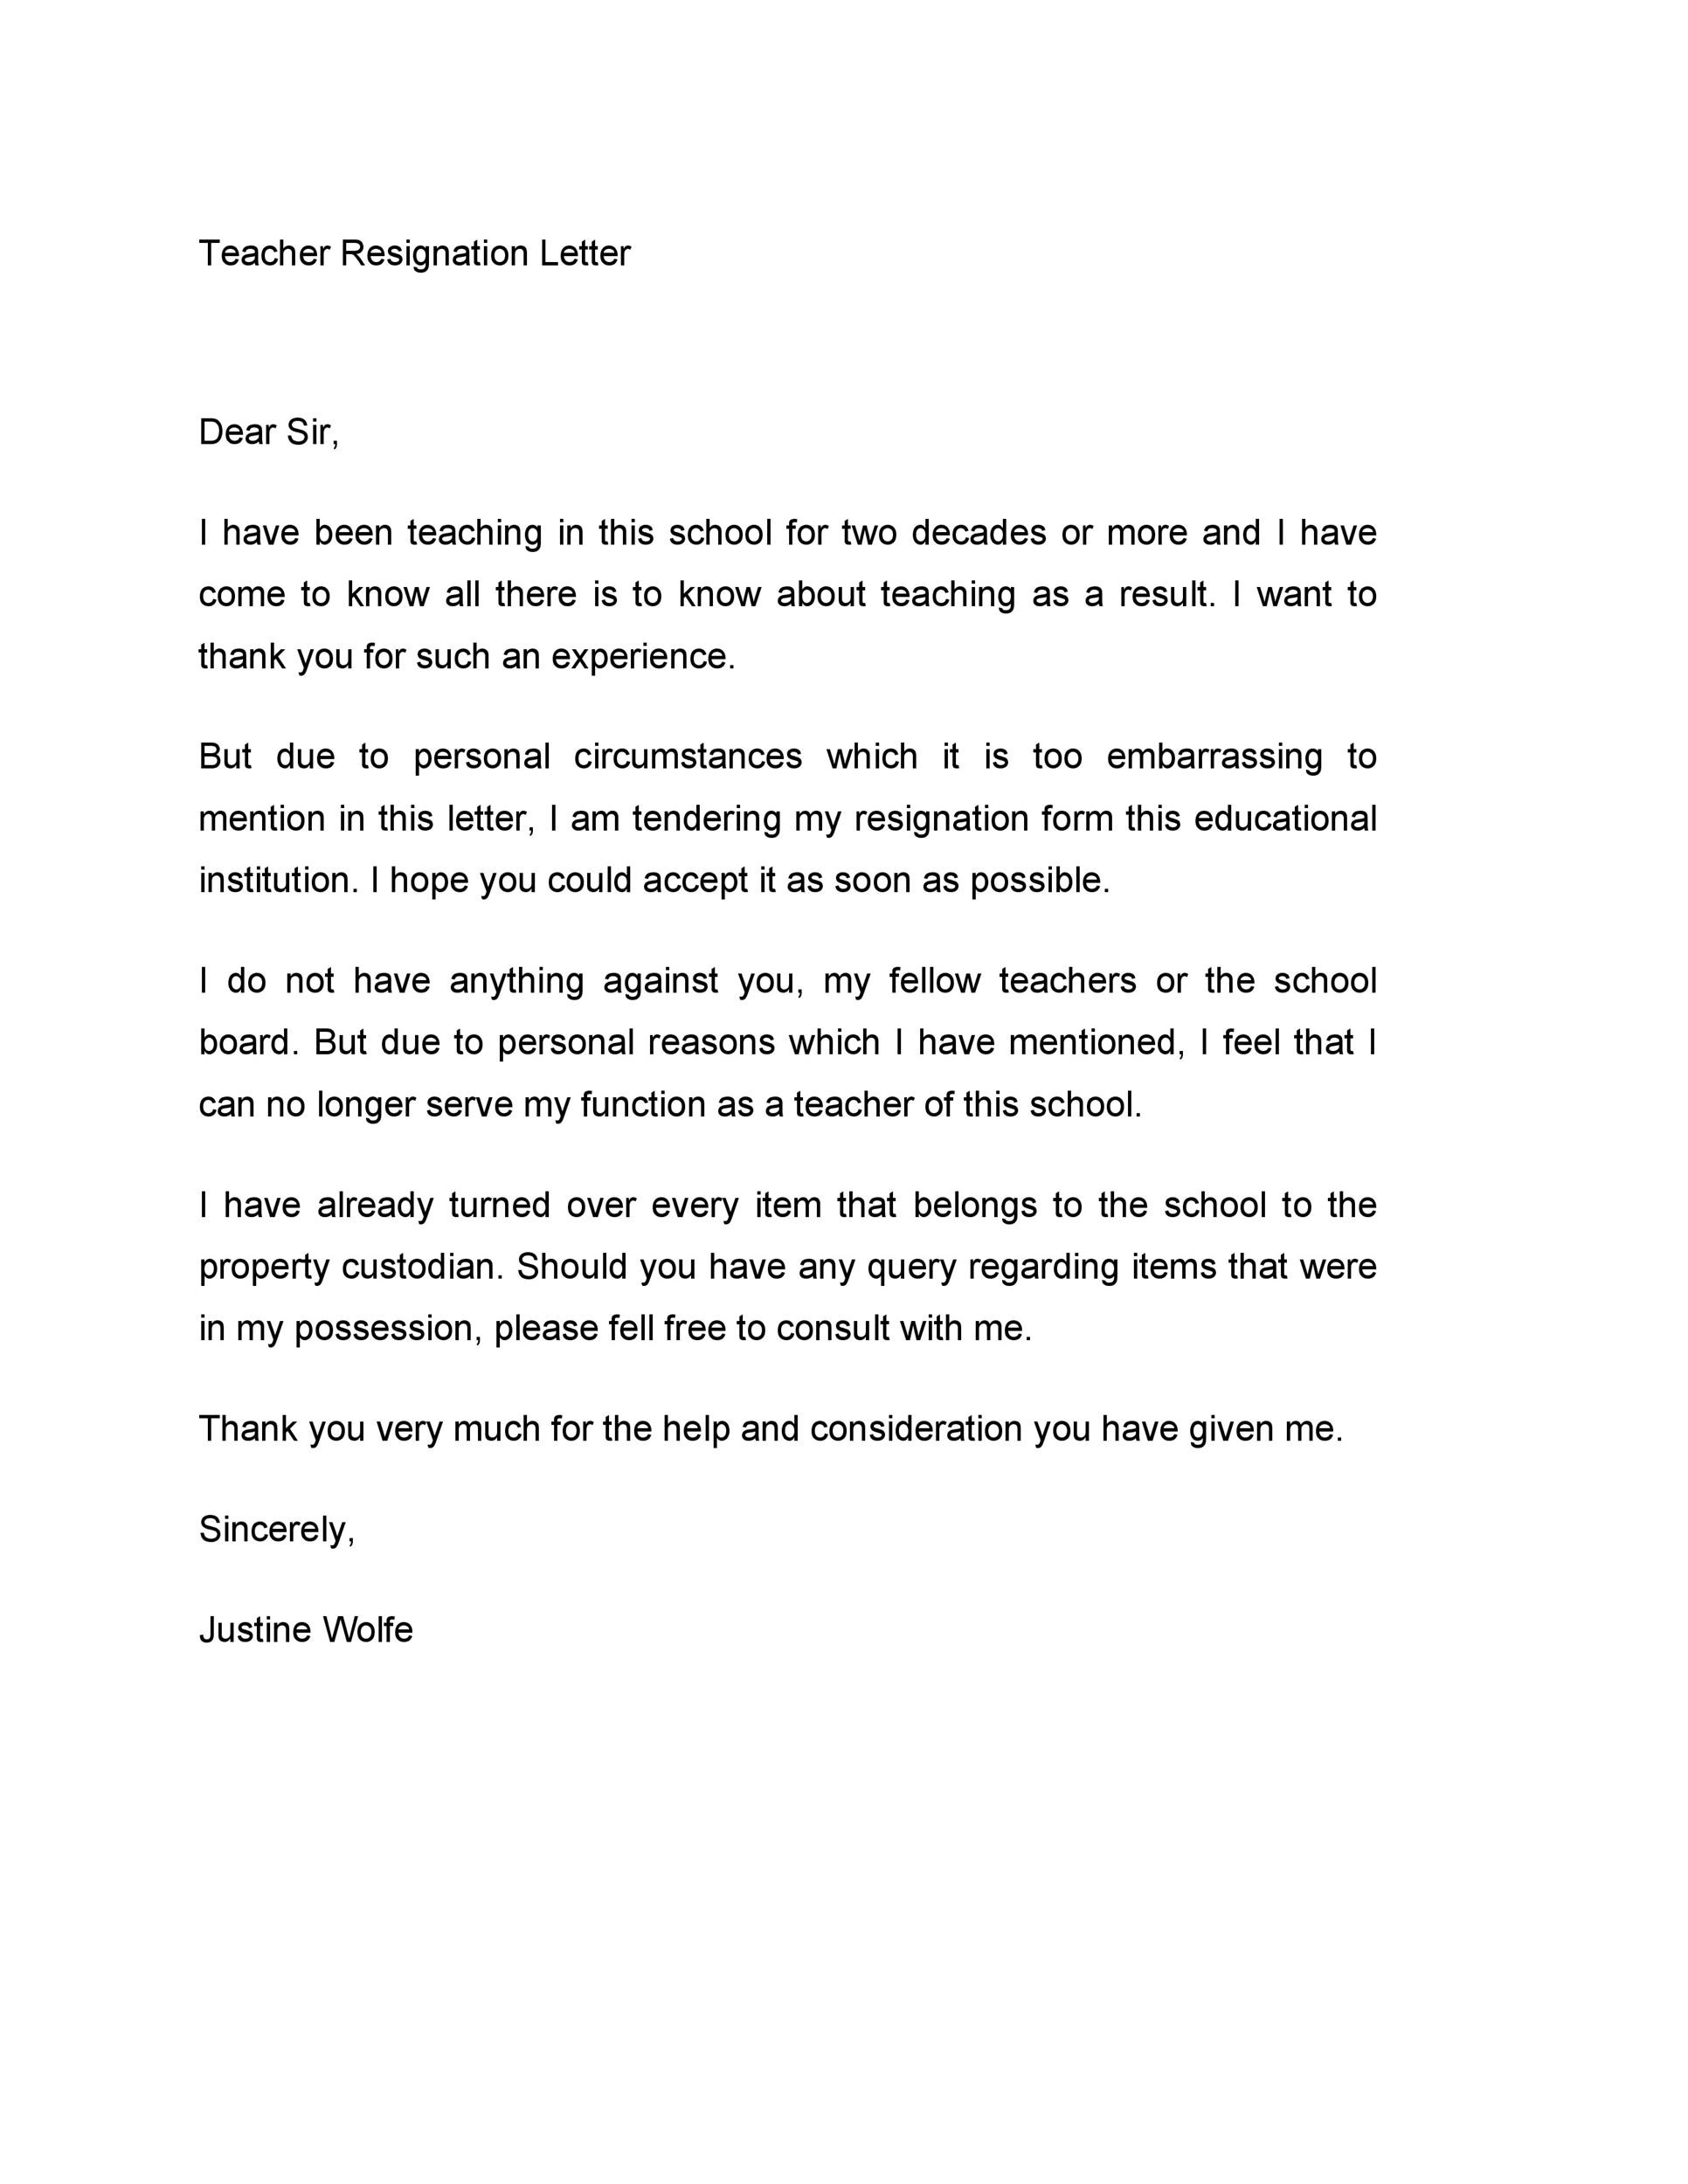 Resignation Letter For Medical Reasons from templatelab.com